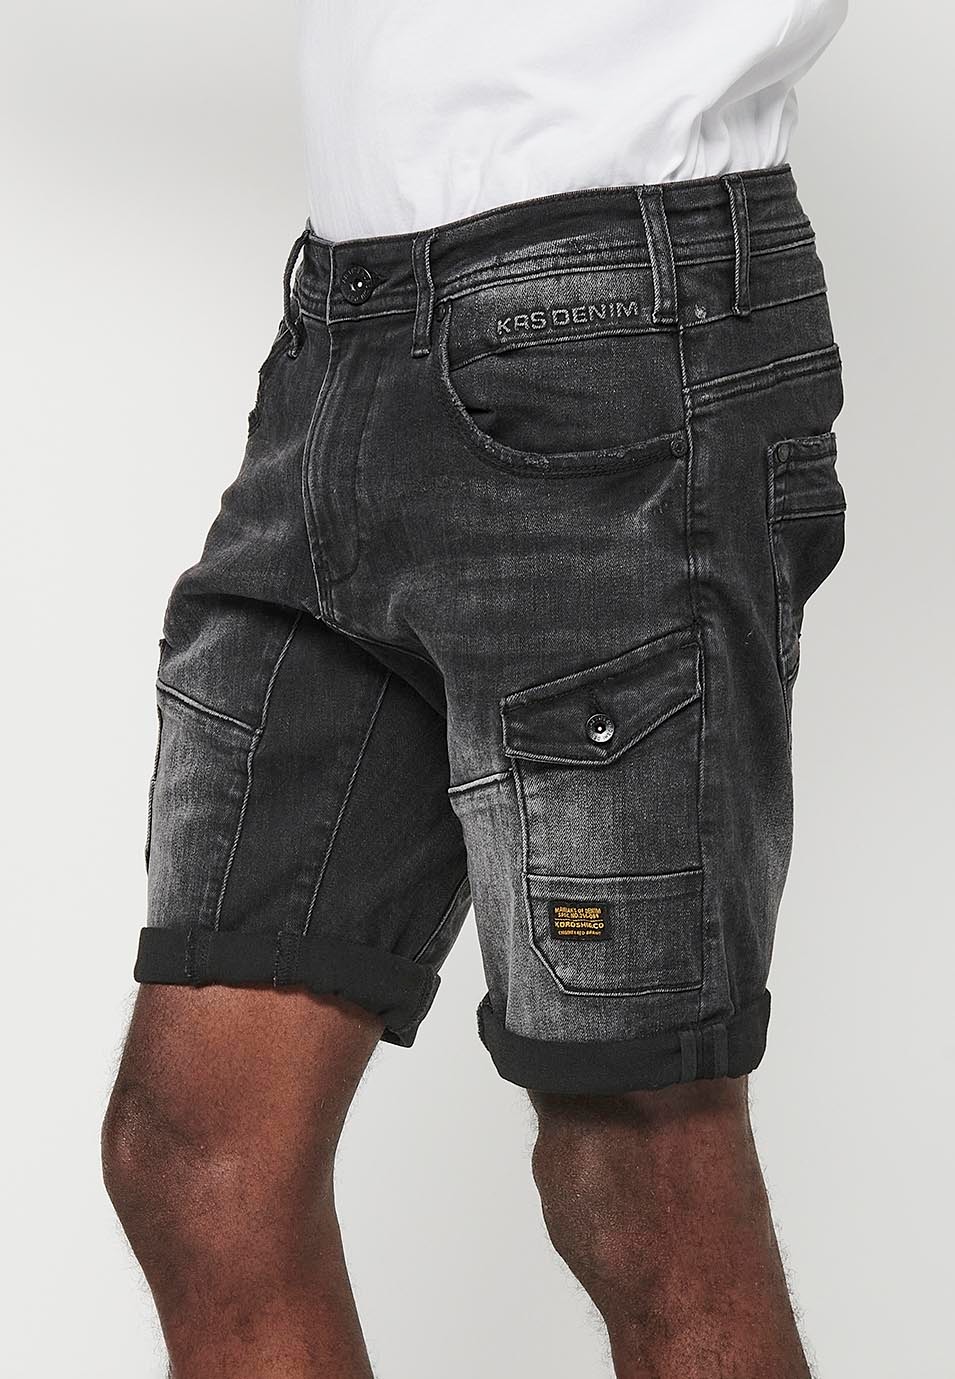 Shorts with Turn-up Finish and Front Closure with Zipper and Button with Five Pockets, One Pocket Pocket and Front Details in Black for Men 3